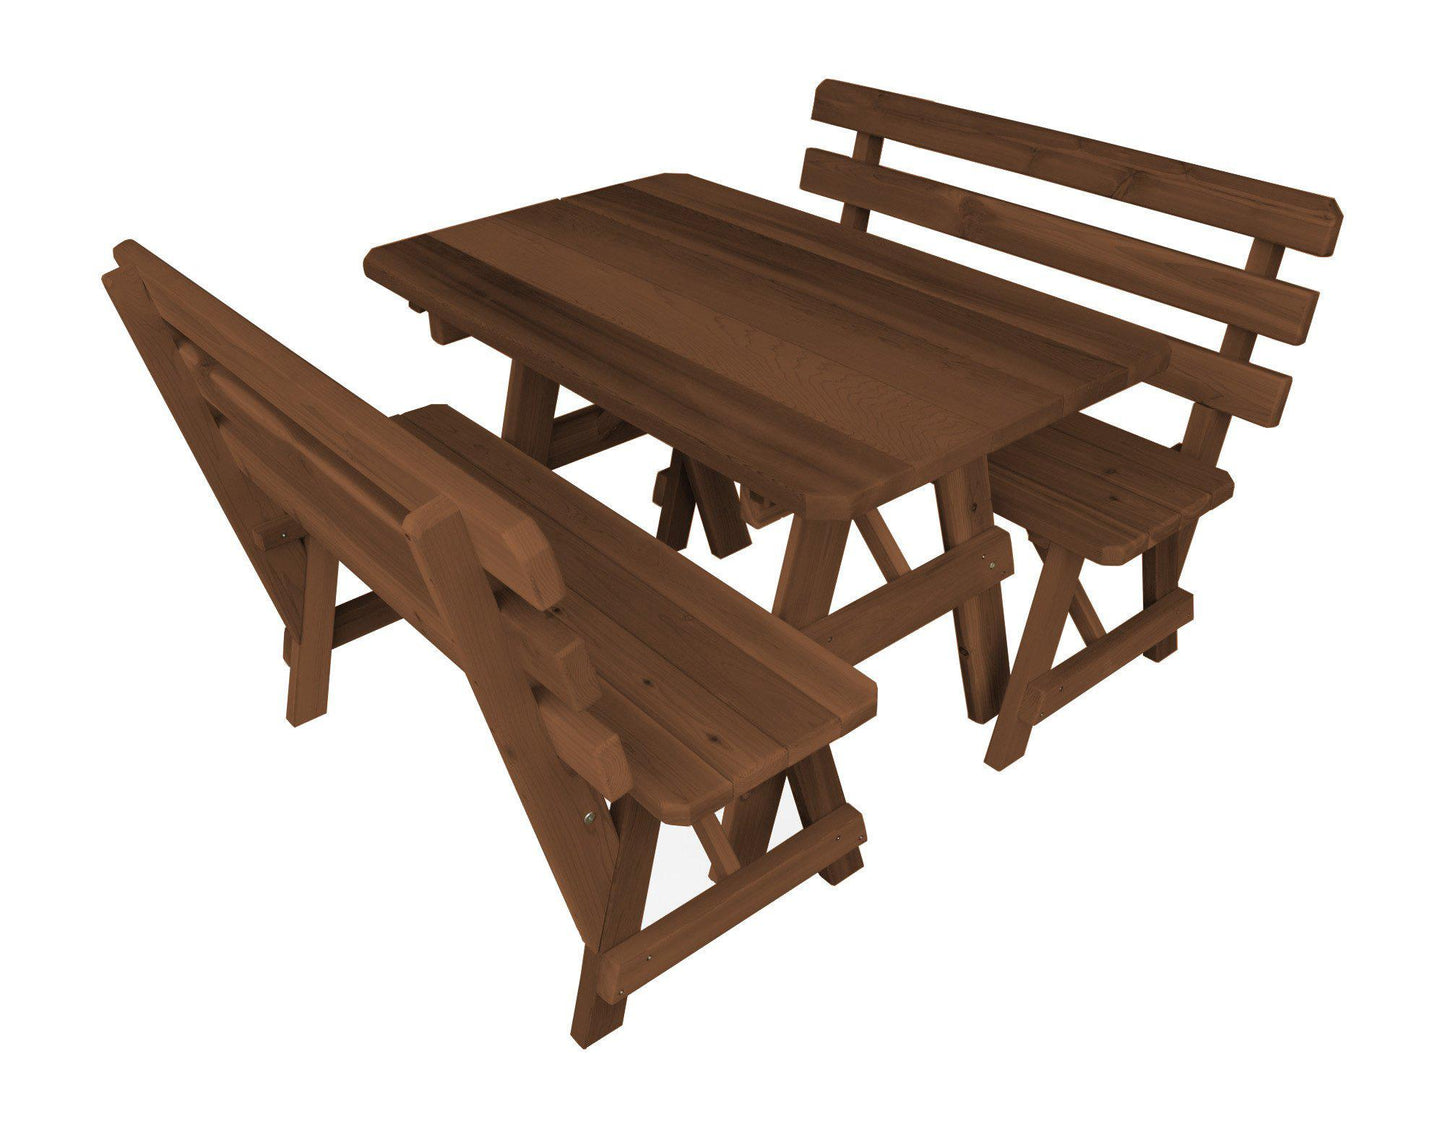 A&L FURNITURE CO. Western Red Cedar 94" Table w/2 Backed Benches - Specify for FREE 2" Umbrella Hole - LEAD TIME TO SHIP 2 WEEKS